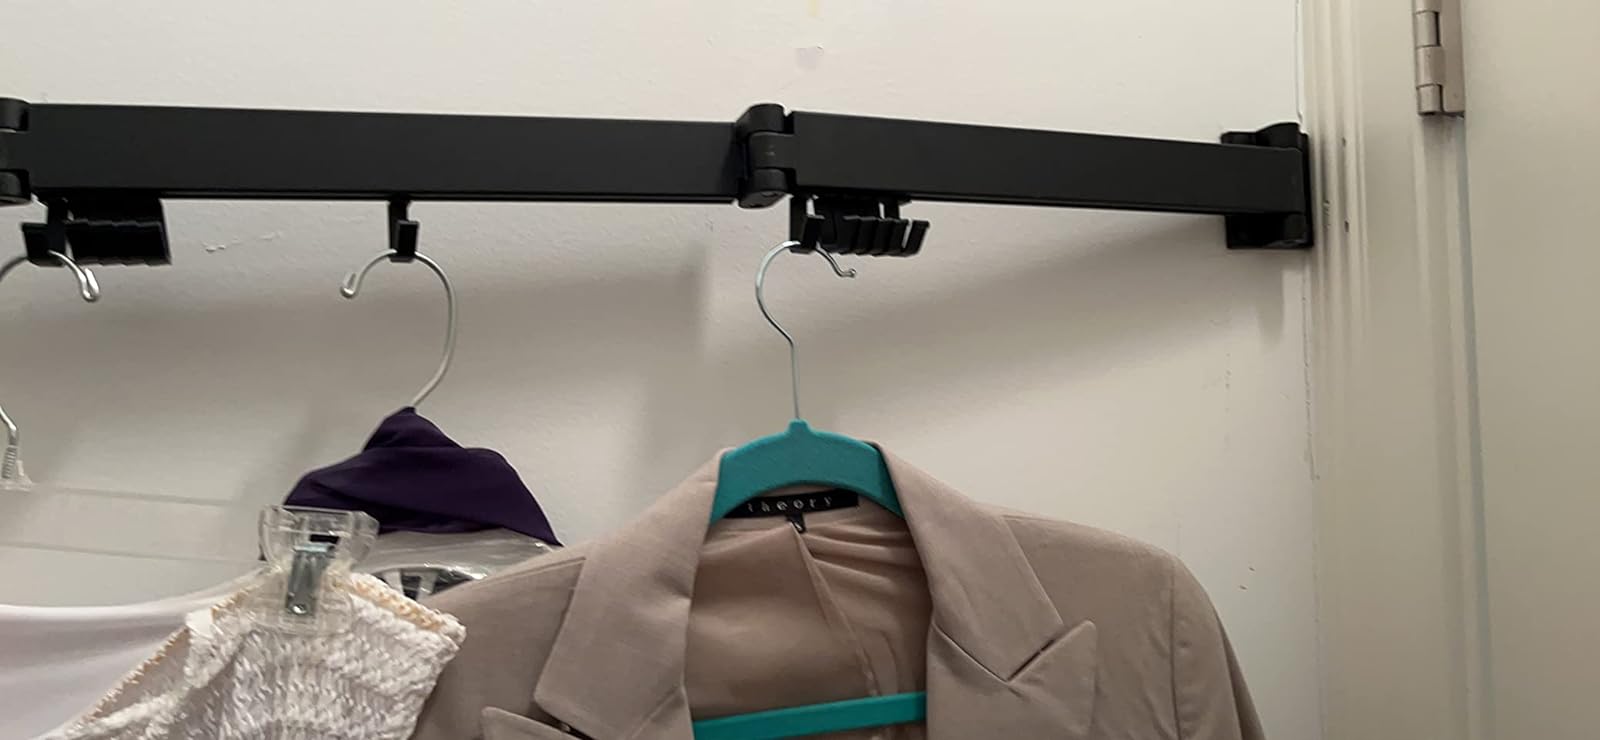 Wall Mounted Clothes Drying Rack photo review